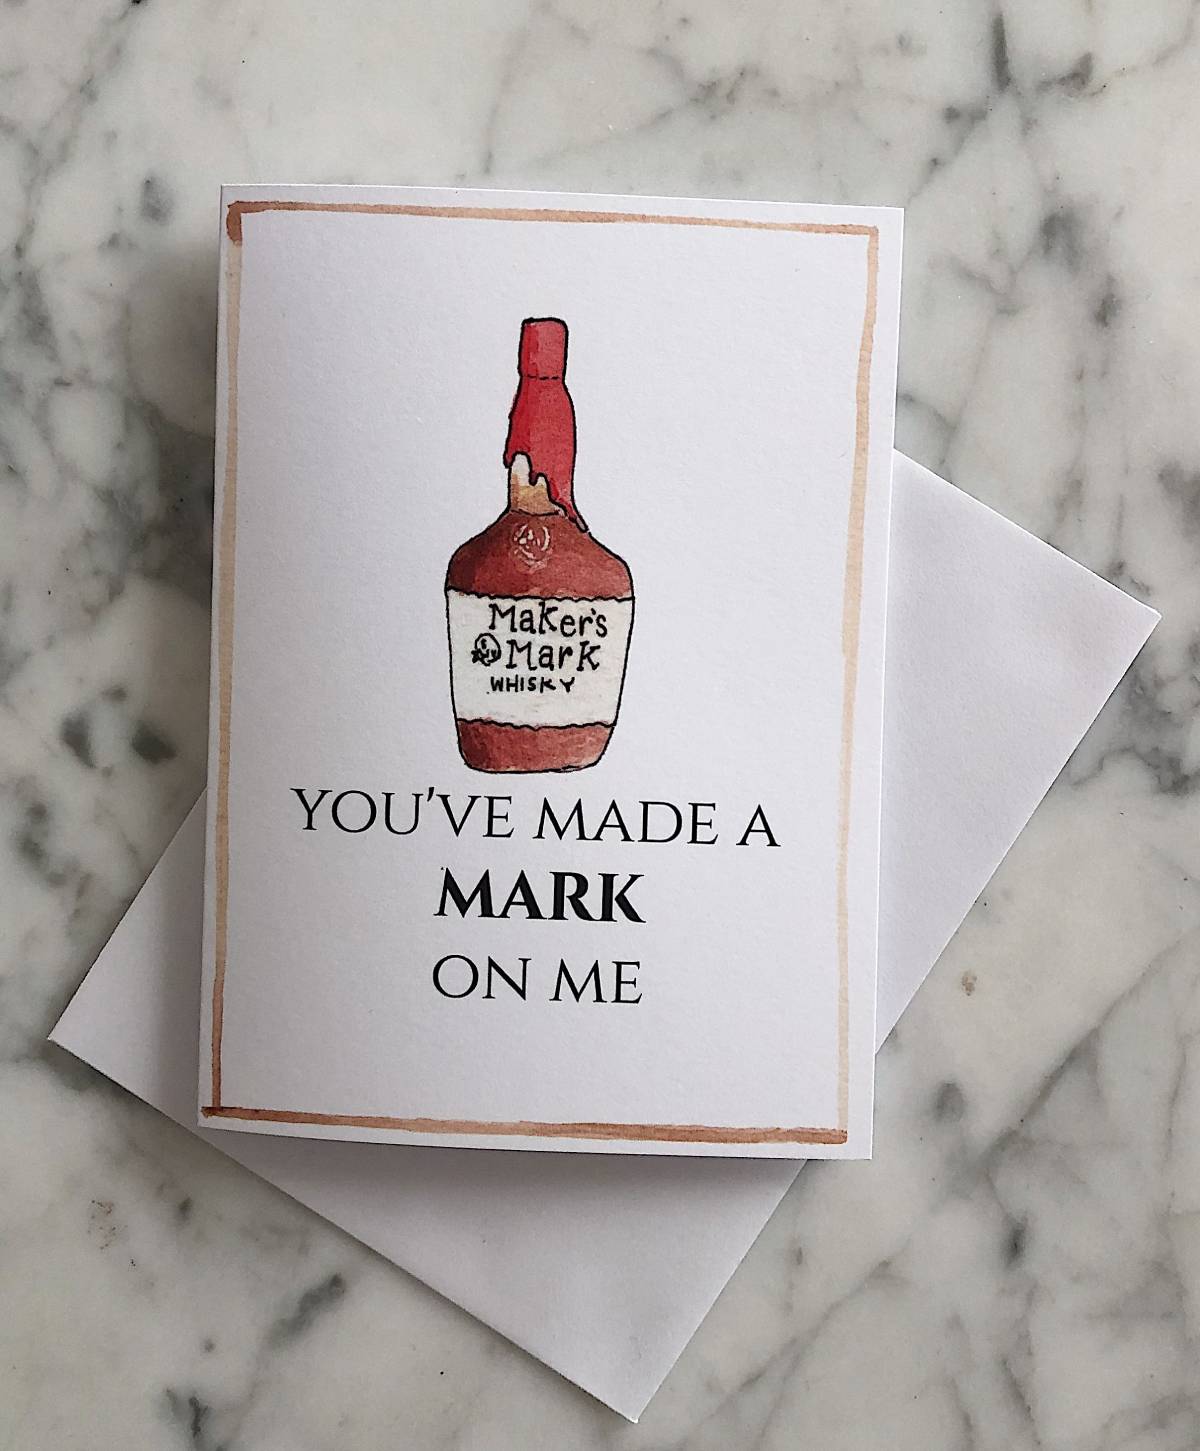 A white bourbon Valentine's Day card with an illustration of a Maker's Mark bottle and the text "you've made a mark on me"